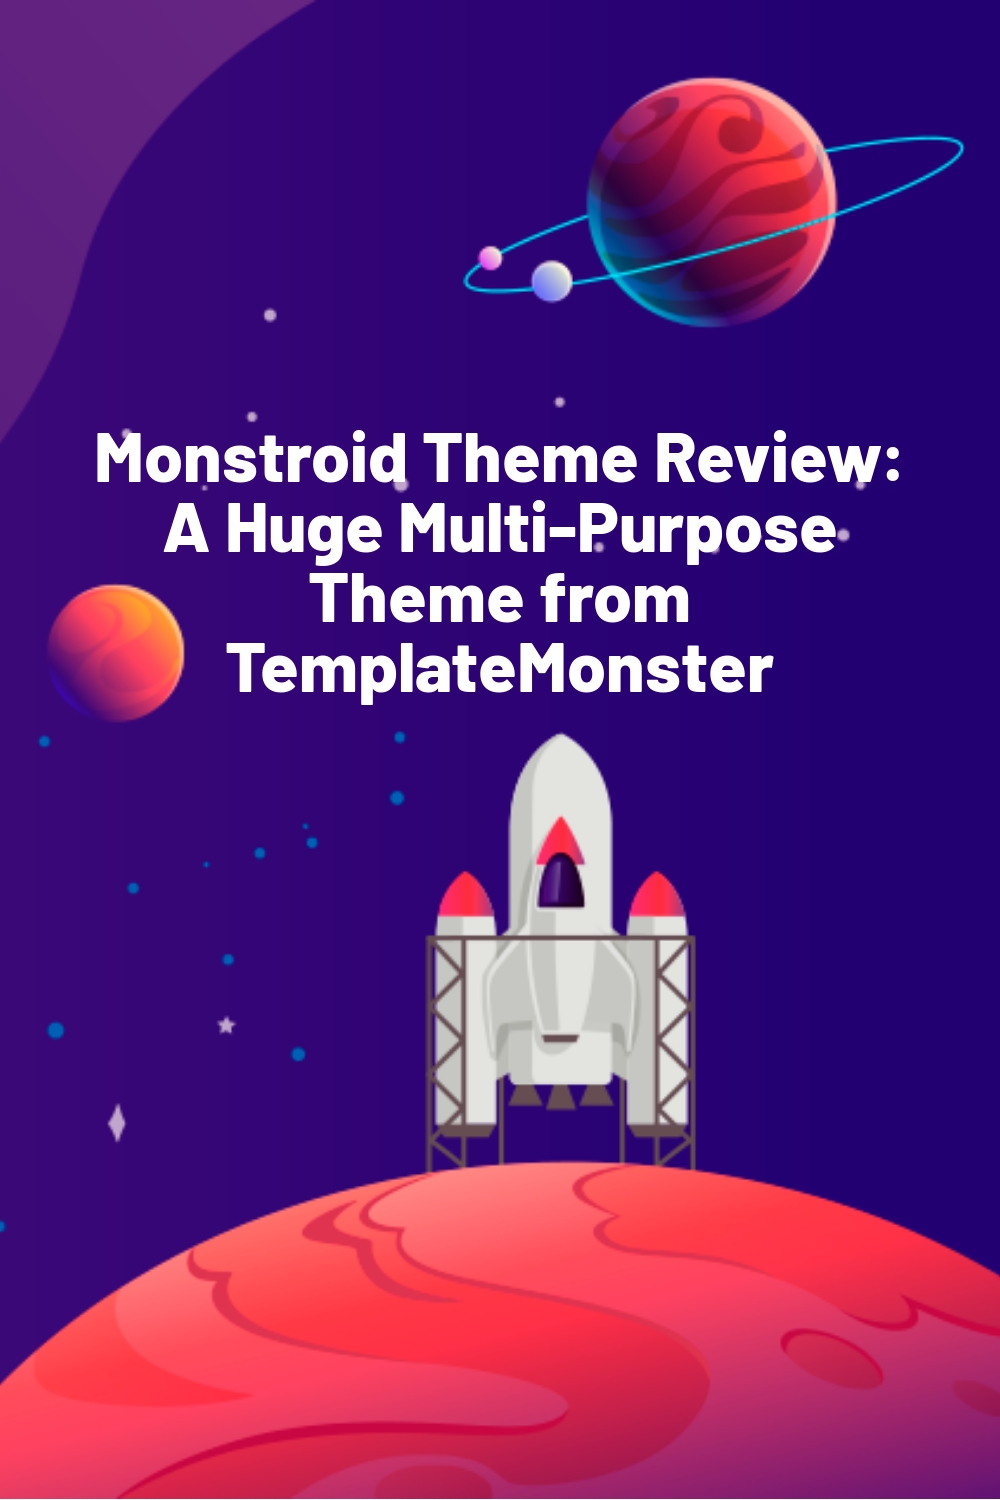 Monstroid Theme Review: A Huge Multi-Purpose Theme from TemplateMonster